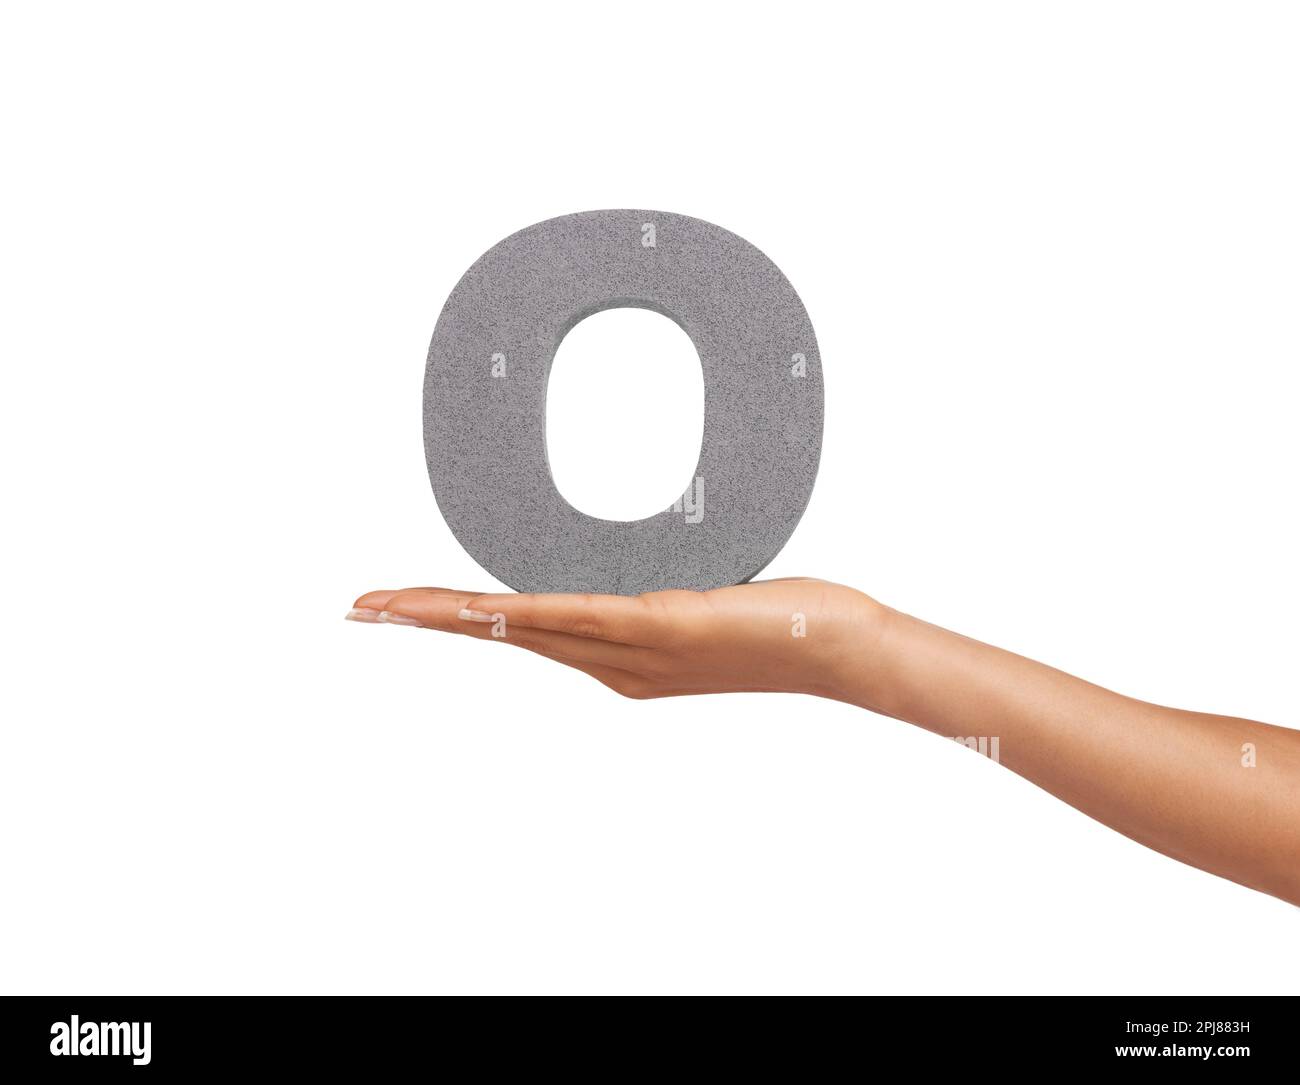 Showing you the letter O. A young woman holding a capital letter O isolated on a white background. Stock Photo